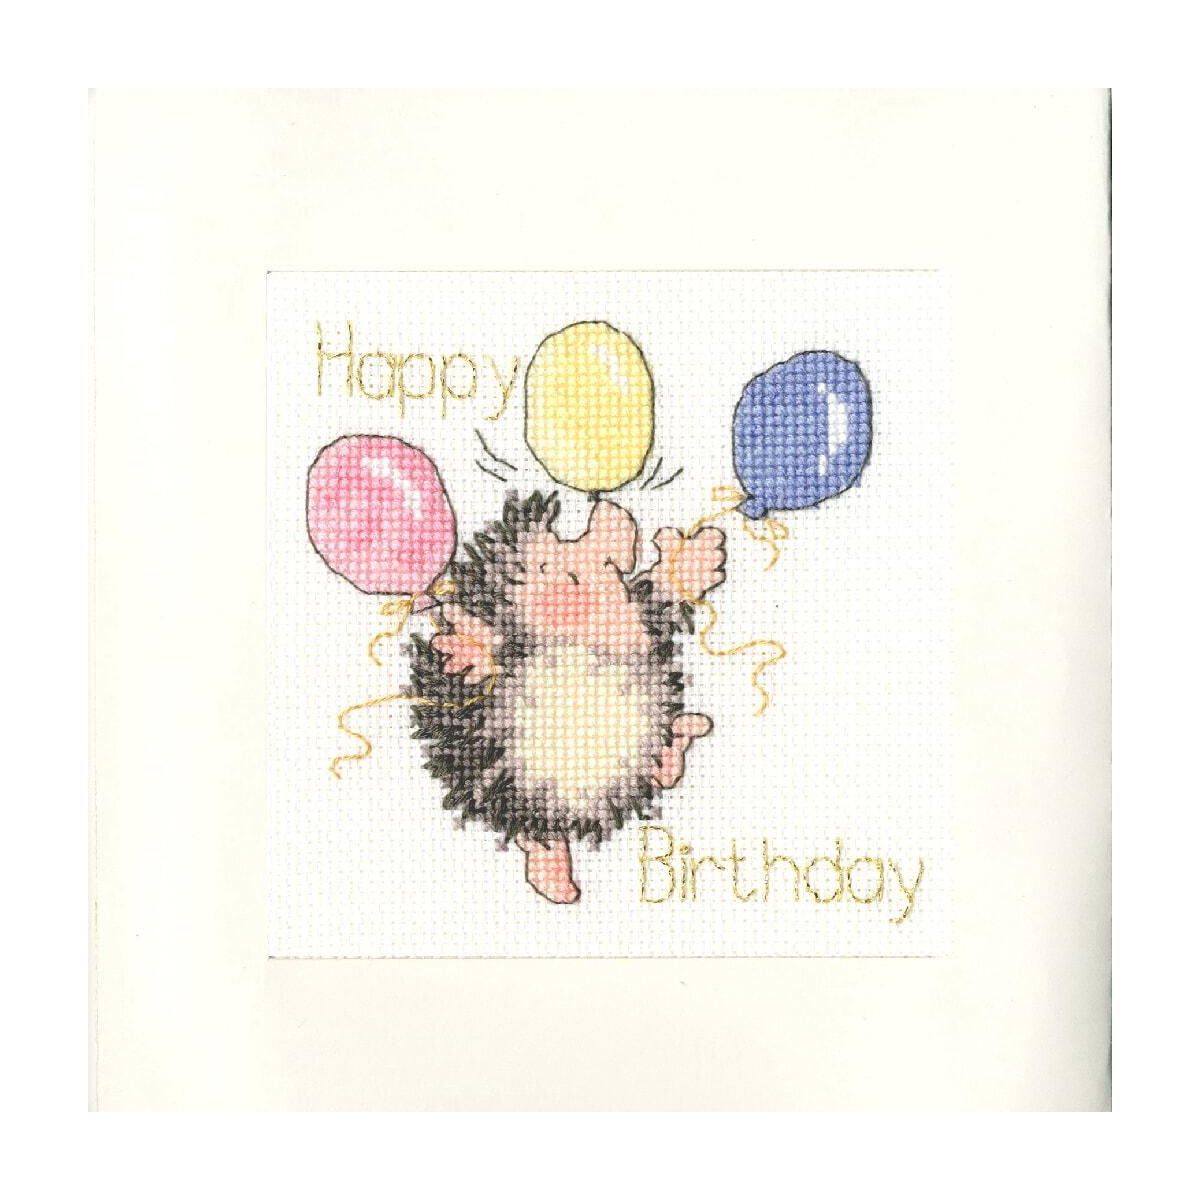 An adorable embroidery pack picture of a cute, smiling...